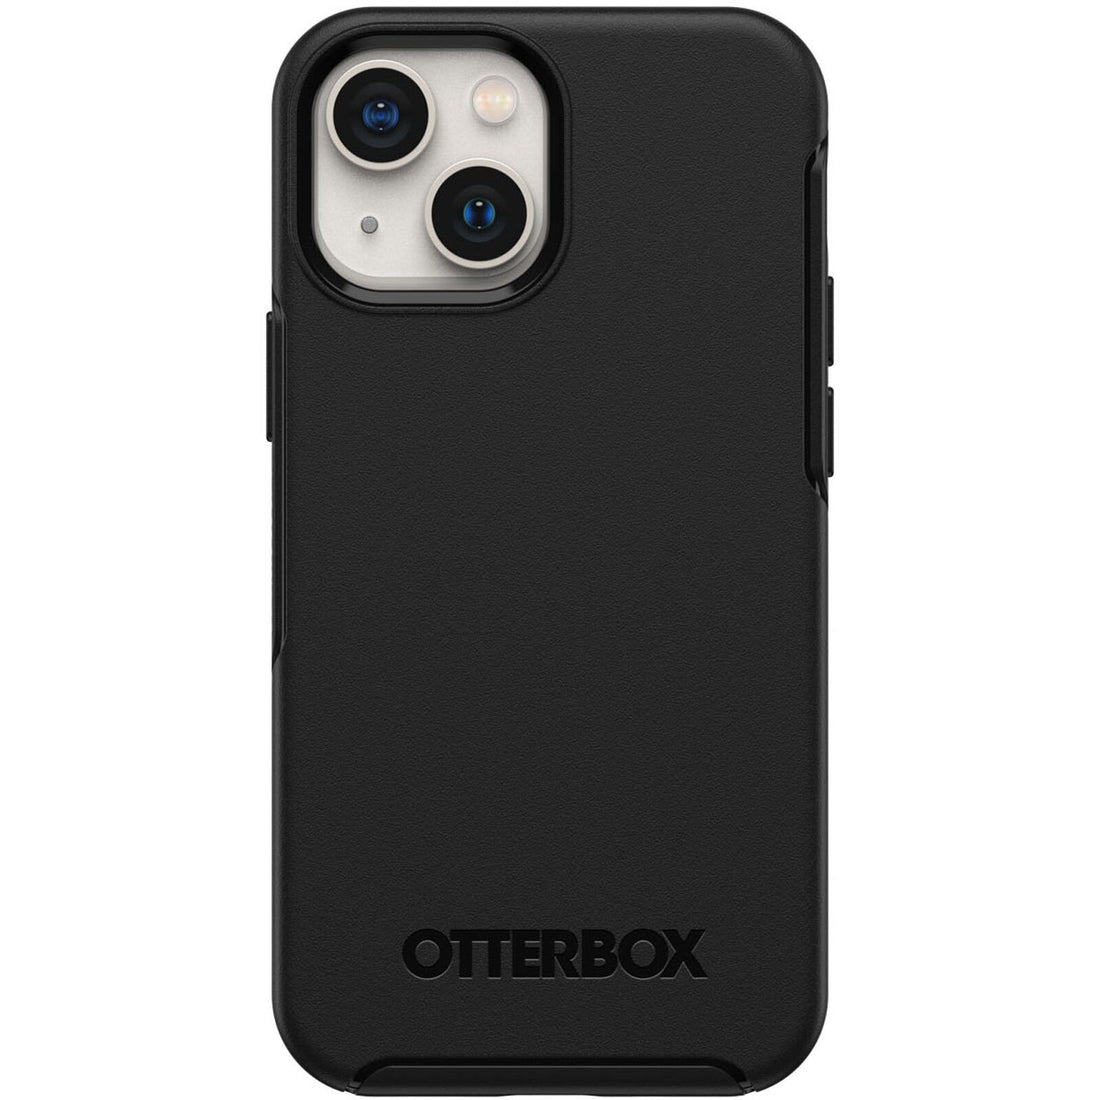 OtterBox SYMMETRY SERIES Case for Apple iPhone 12 Mini - Black (Certified Refurbished)